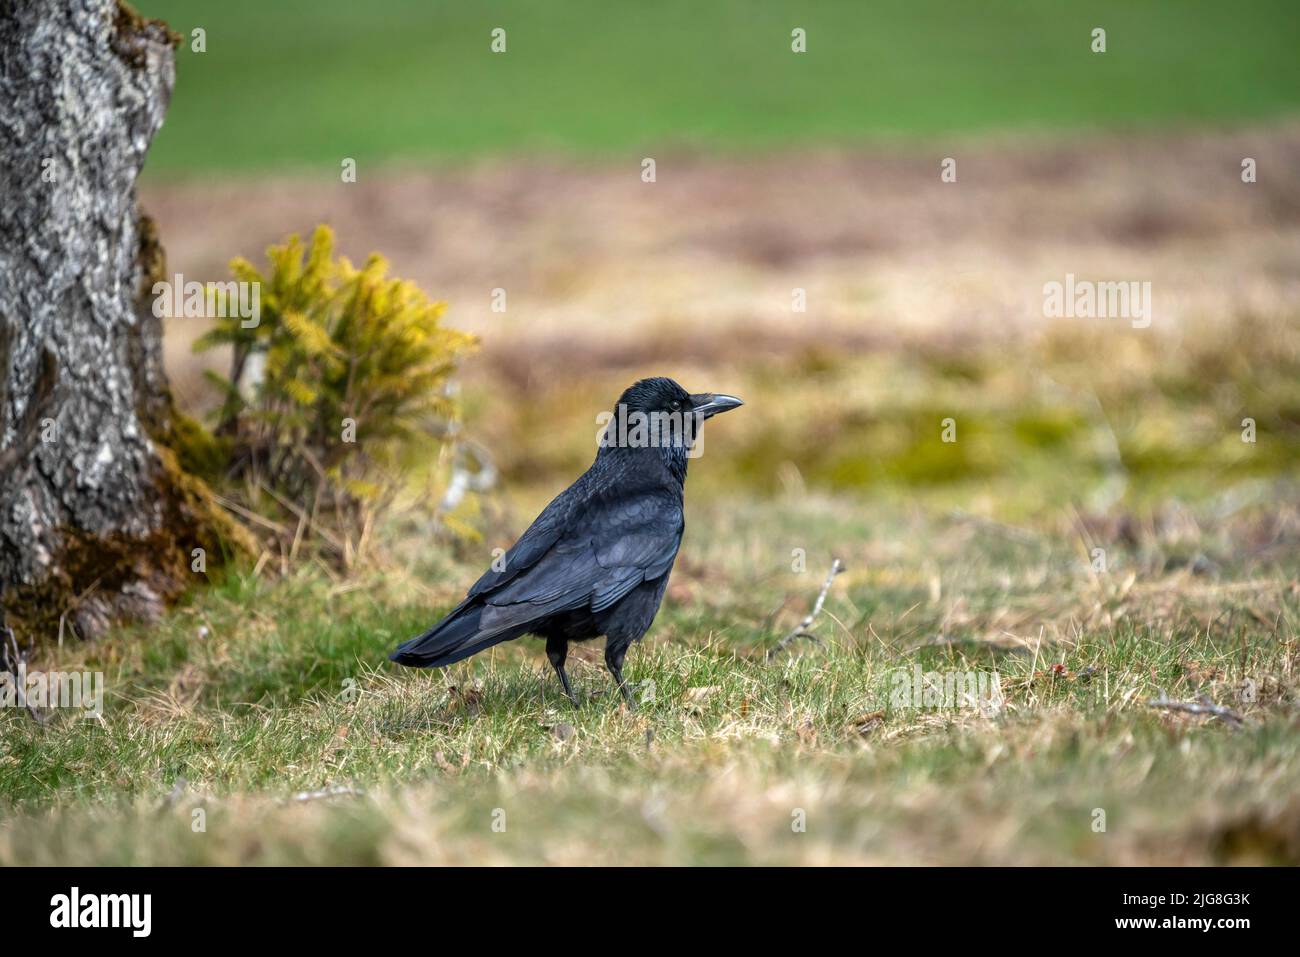 The carrion crow or raven crow is a species of bird from the corvid family. Stock Photo